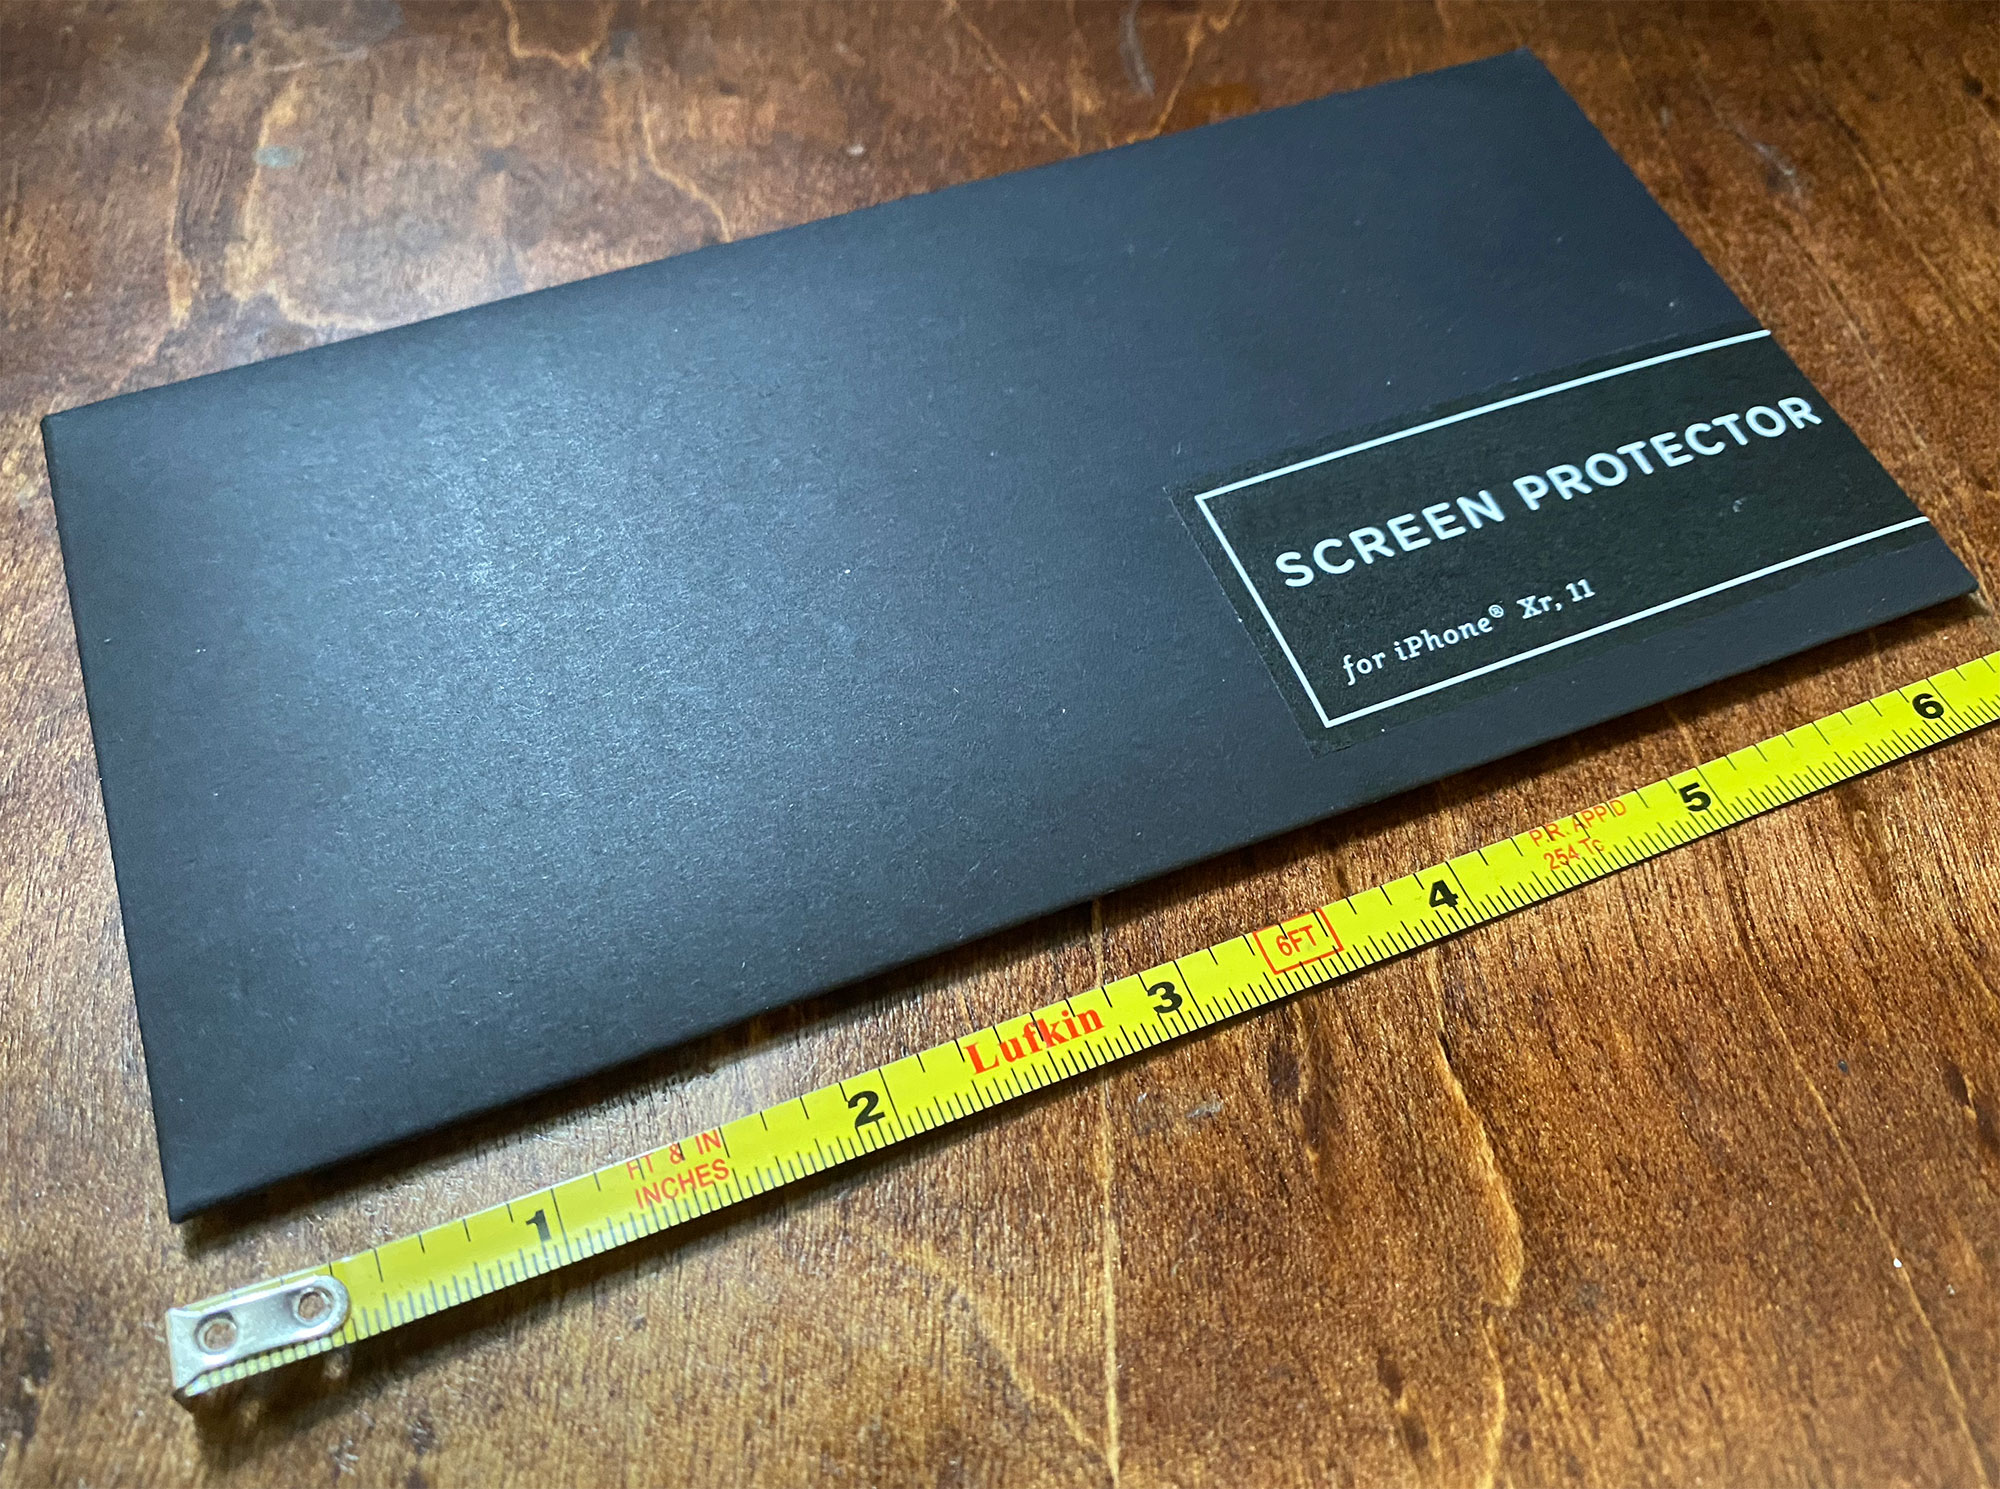 Screen Protector Package